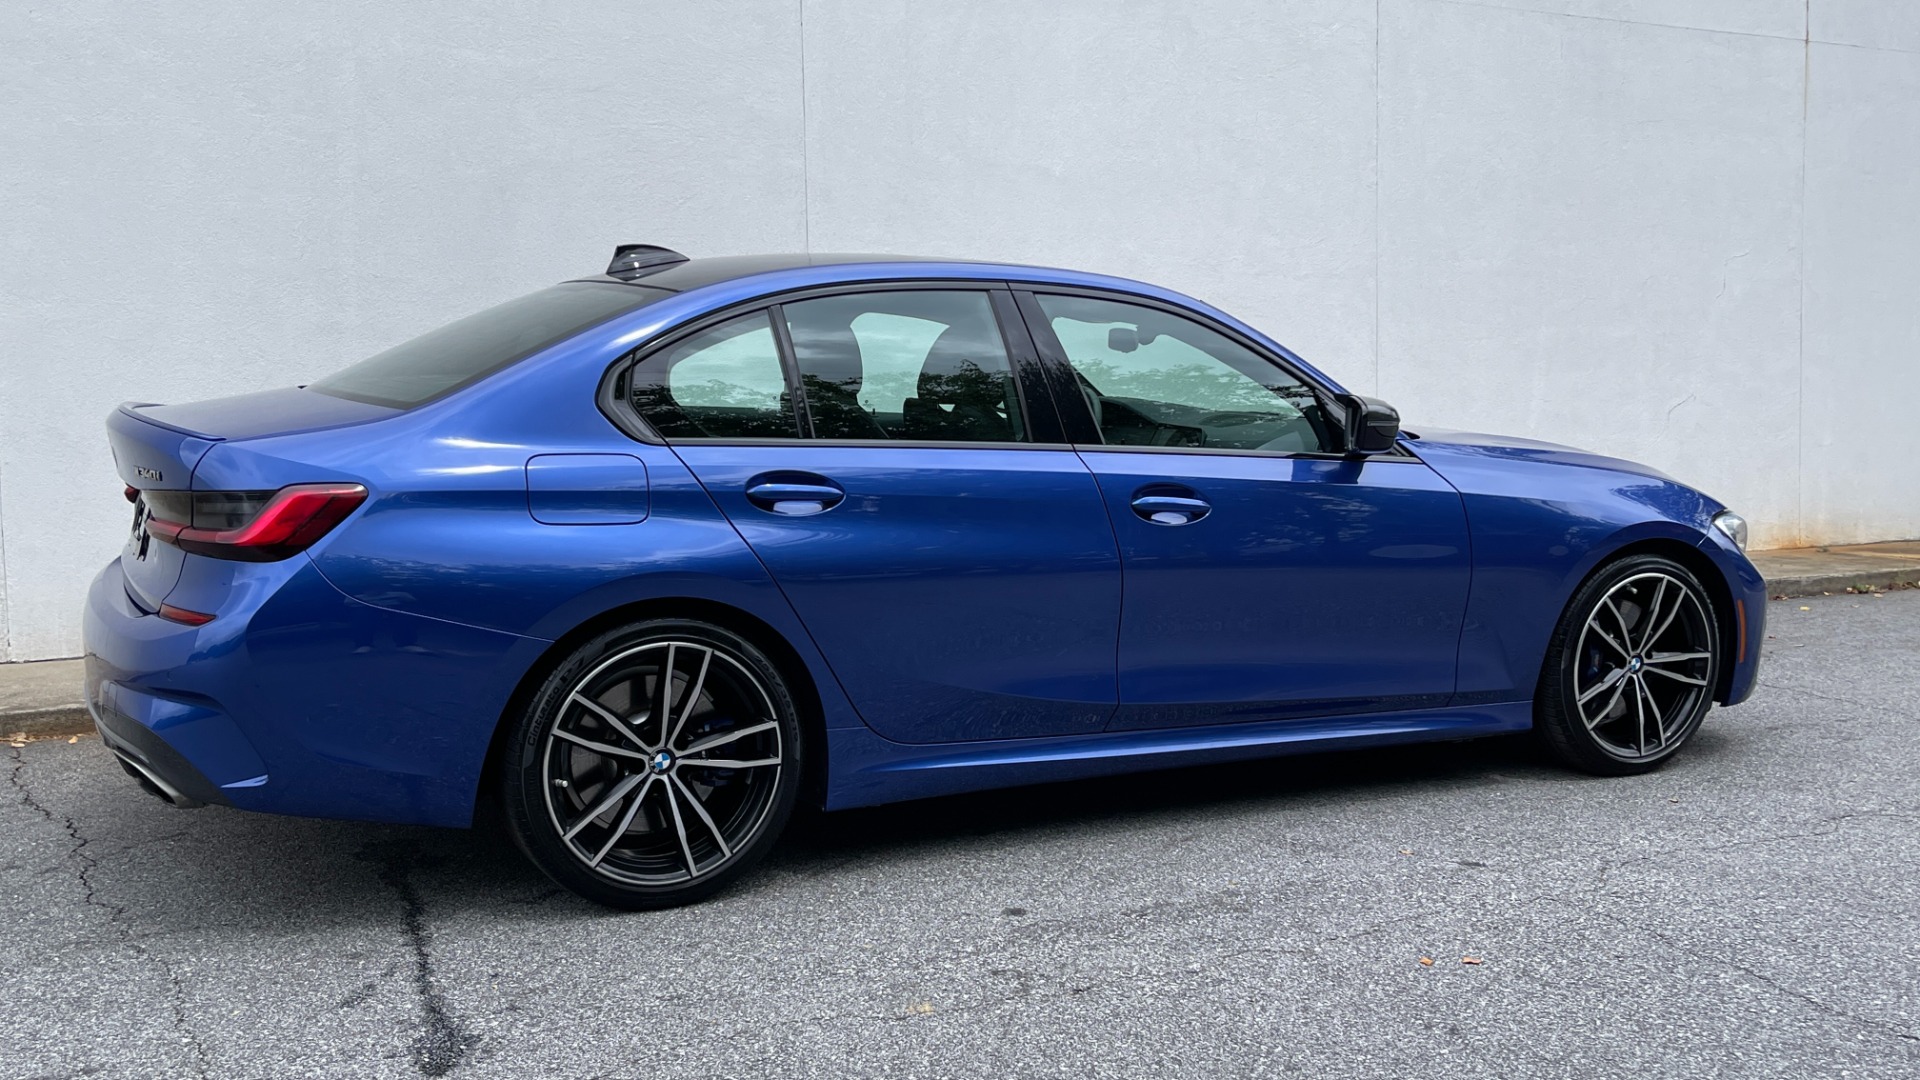 Used 2021 BMW 3 Series M340i / REMOTE START / DRIVING ASSISTANCE / 19IN WHEELS / INTAKE SYSTEM for sale $52,995 at Formula Imports in Charlotte NC 28227 3